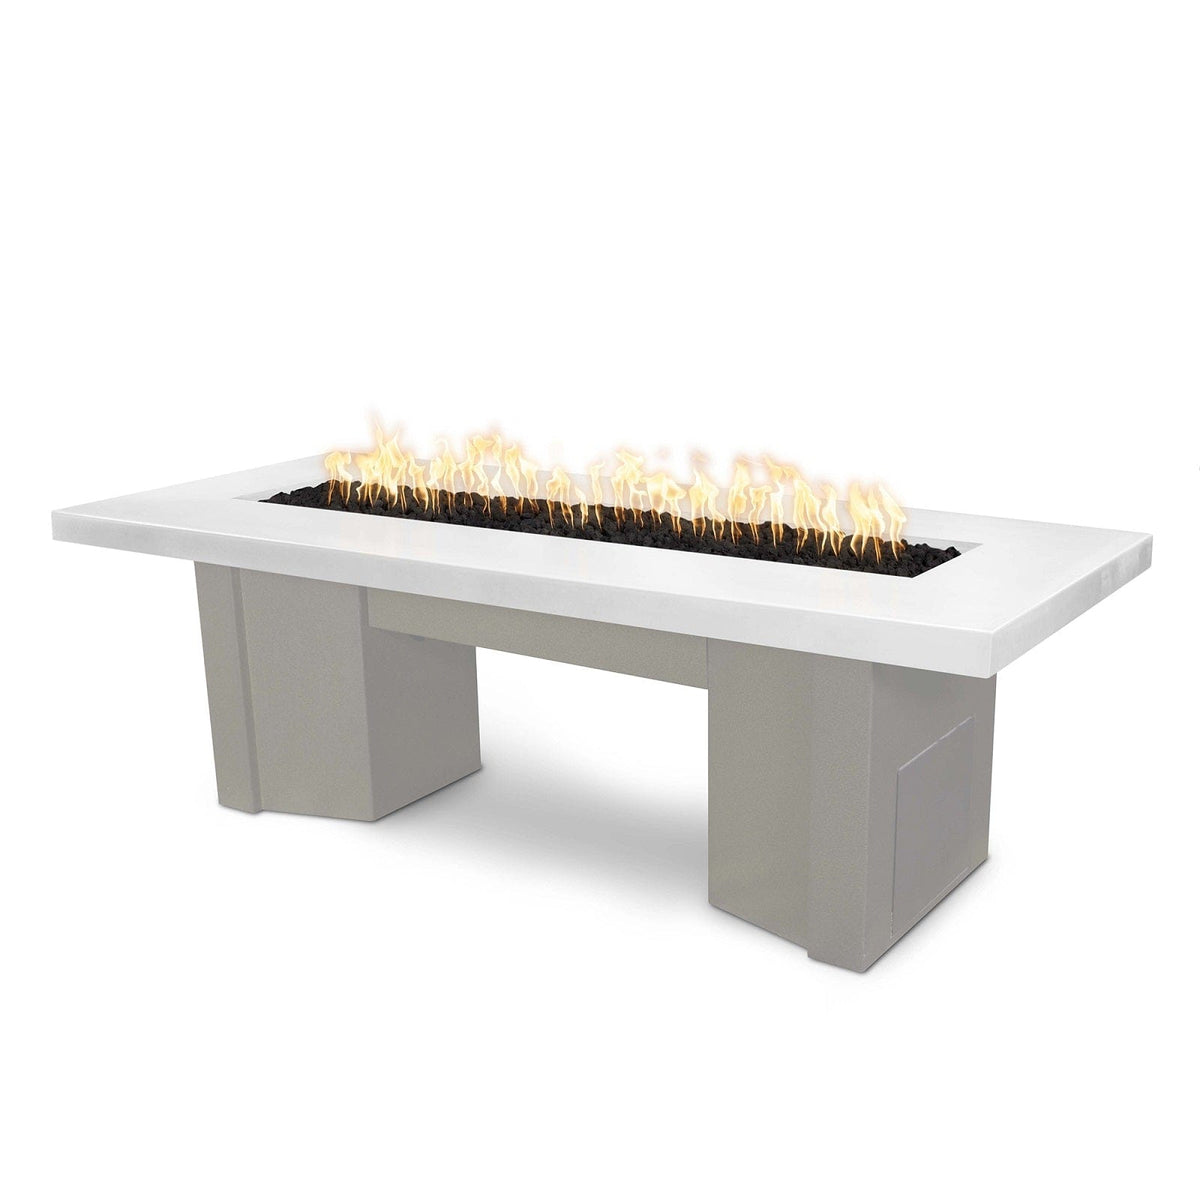 The Outdoor Plus Fire Features Limestone (-LIM) / Pewter Powder Coated Steel (-PEW) The Outdoor Plus 60&quot; Alameda Fire Table Smooth Concrete in Liquid Propane - Match Lit with Flame Sense System / OPT-ALMGFRC60FSML-LP